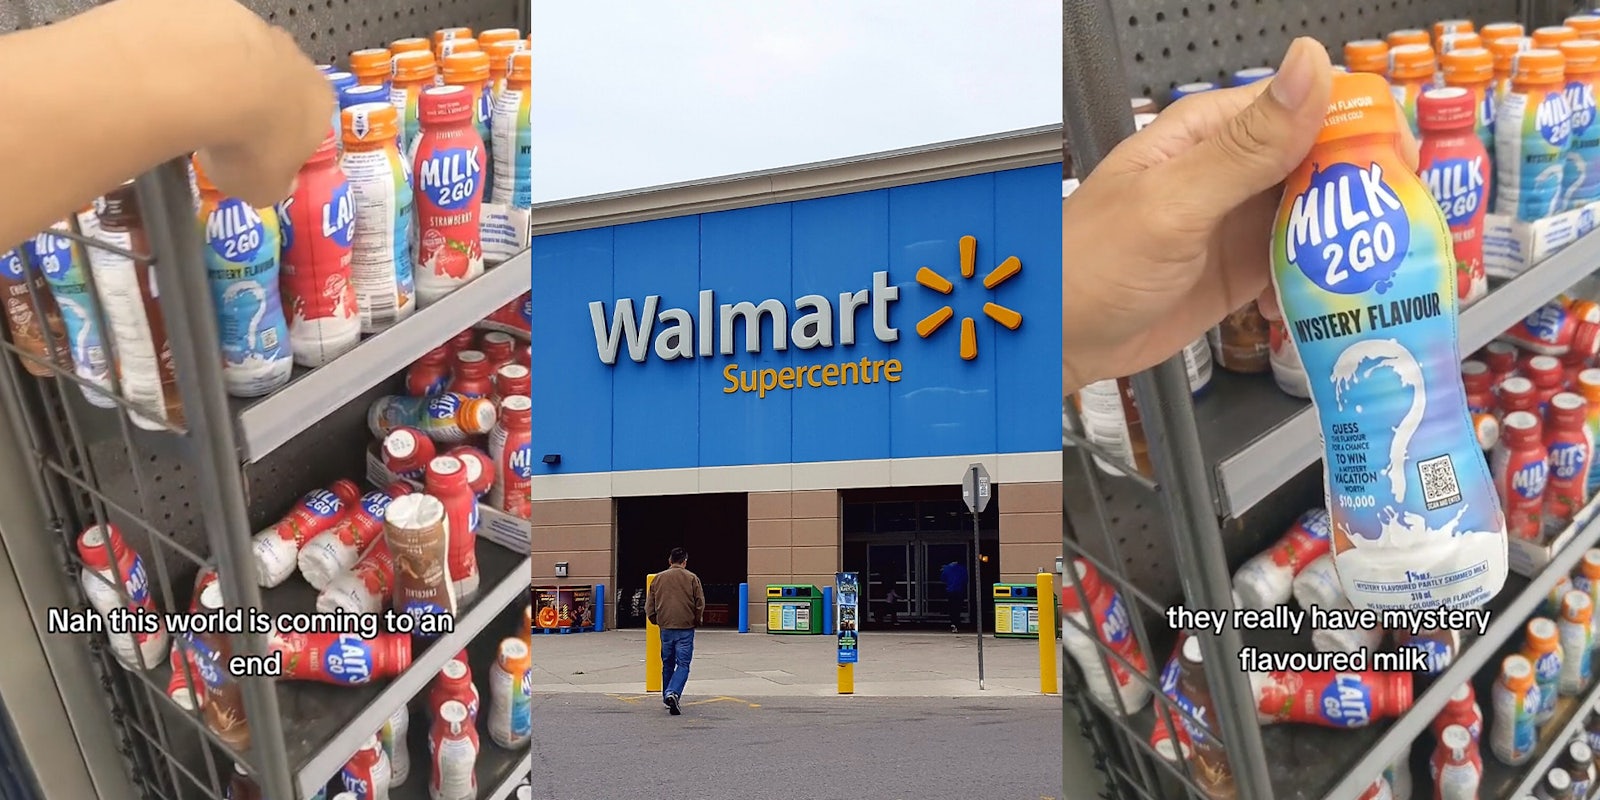 Shopper finds 'mystery-flavored milk' at Walmart